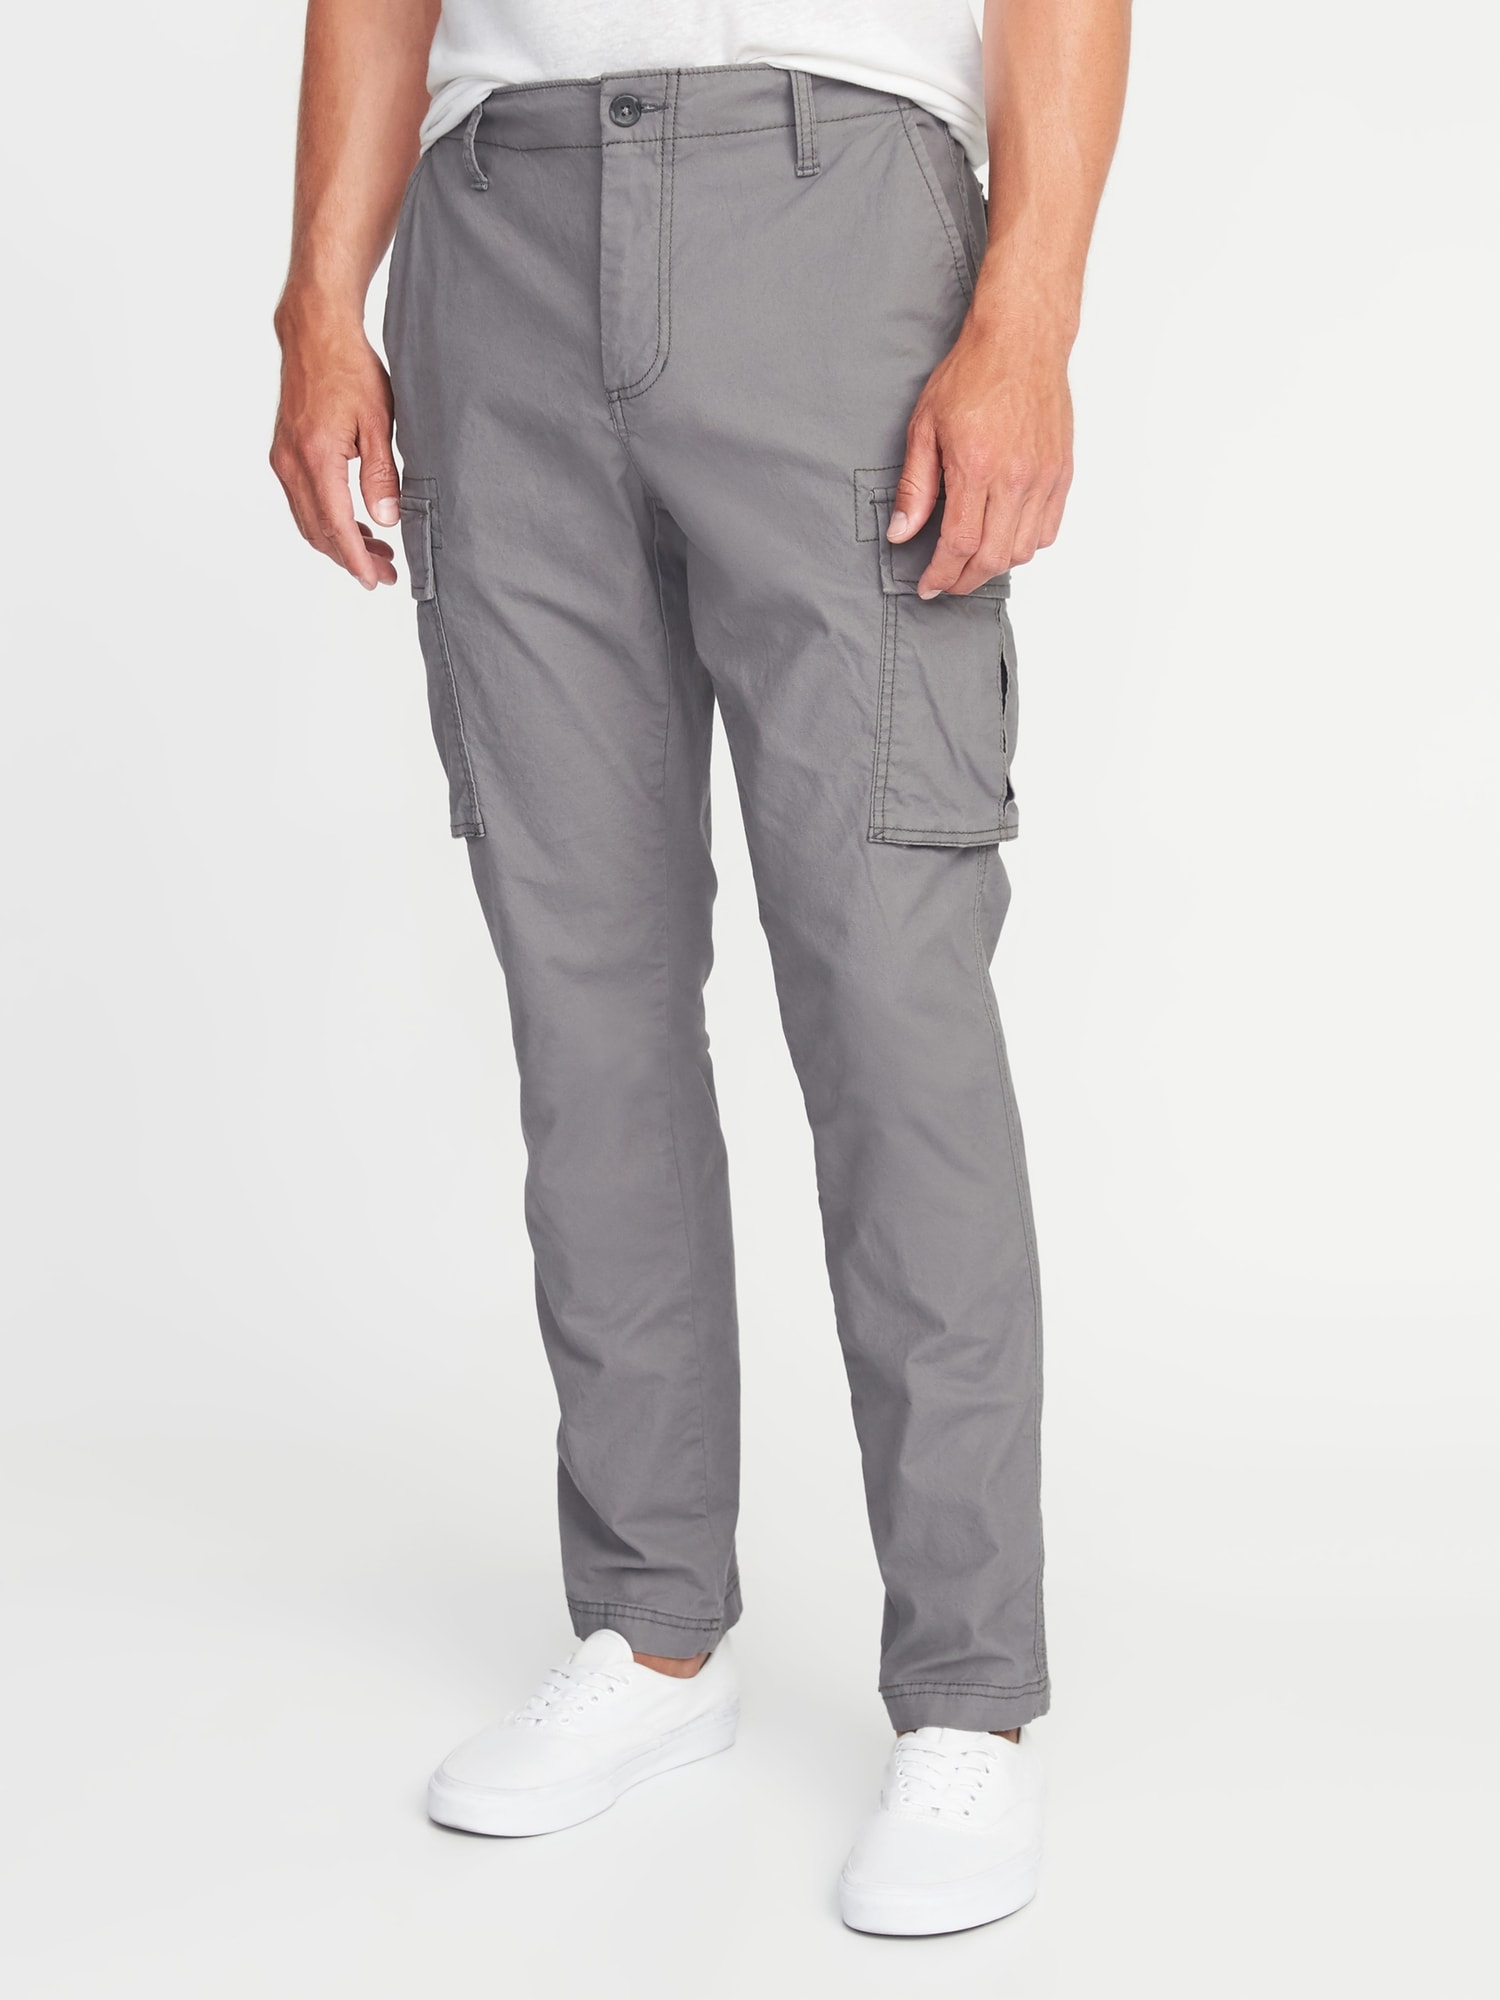 Old Navy Loose Fit Cargo Pants - FitnessRetro